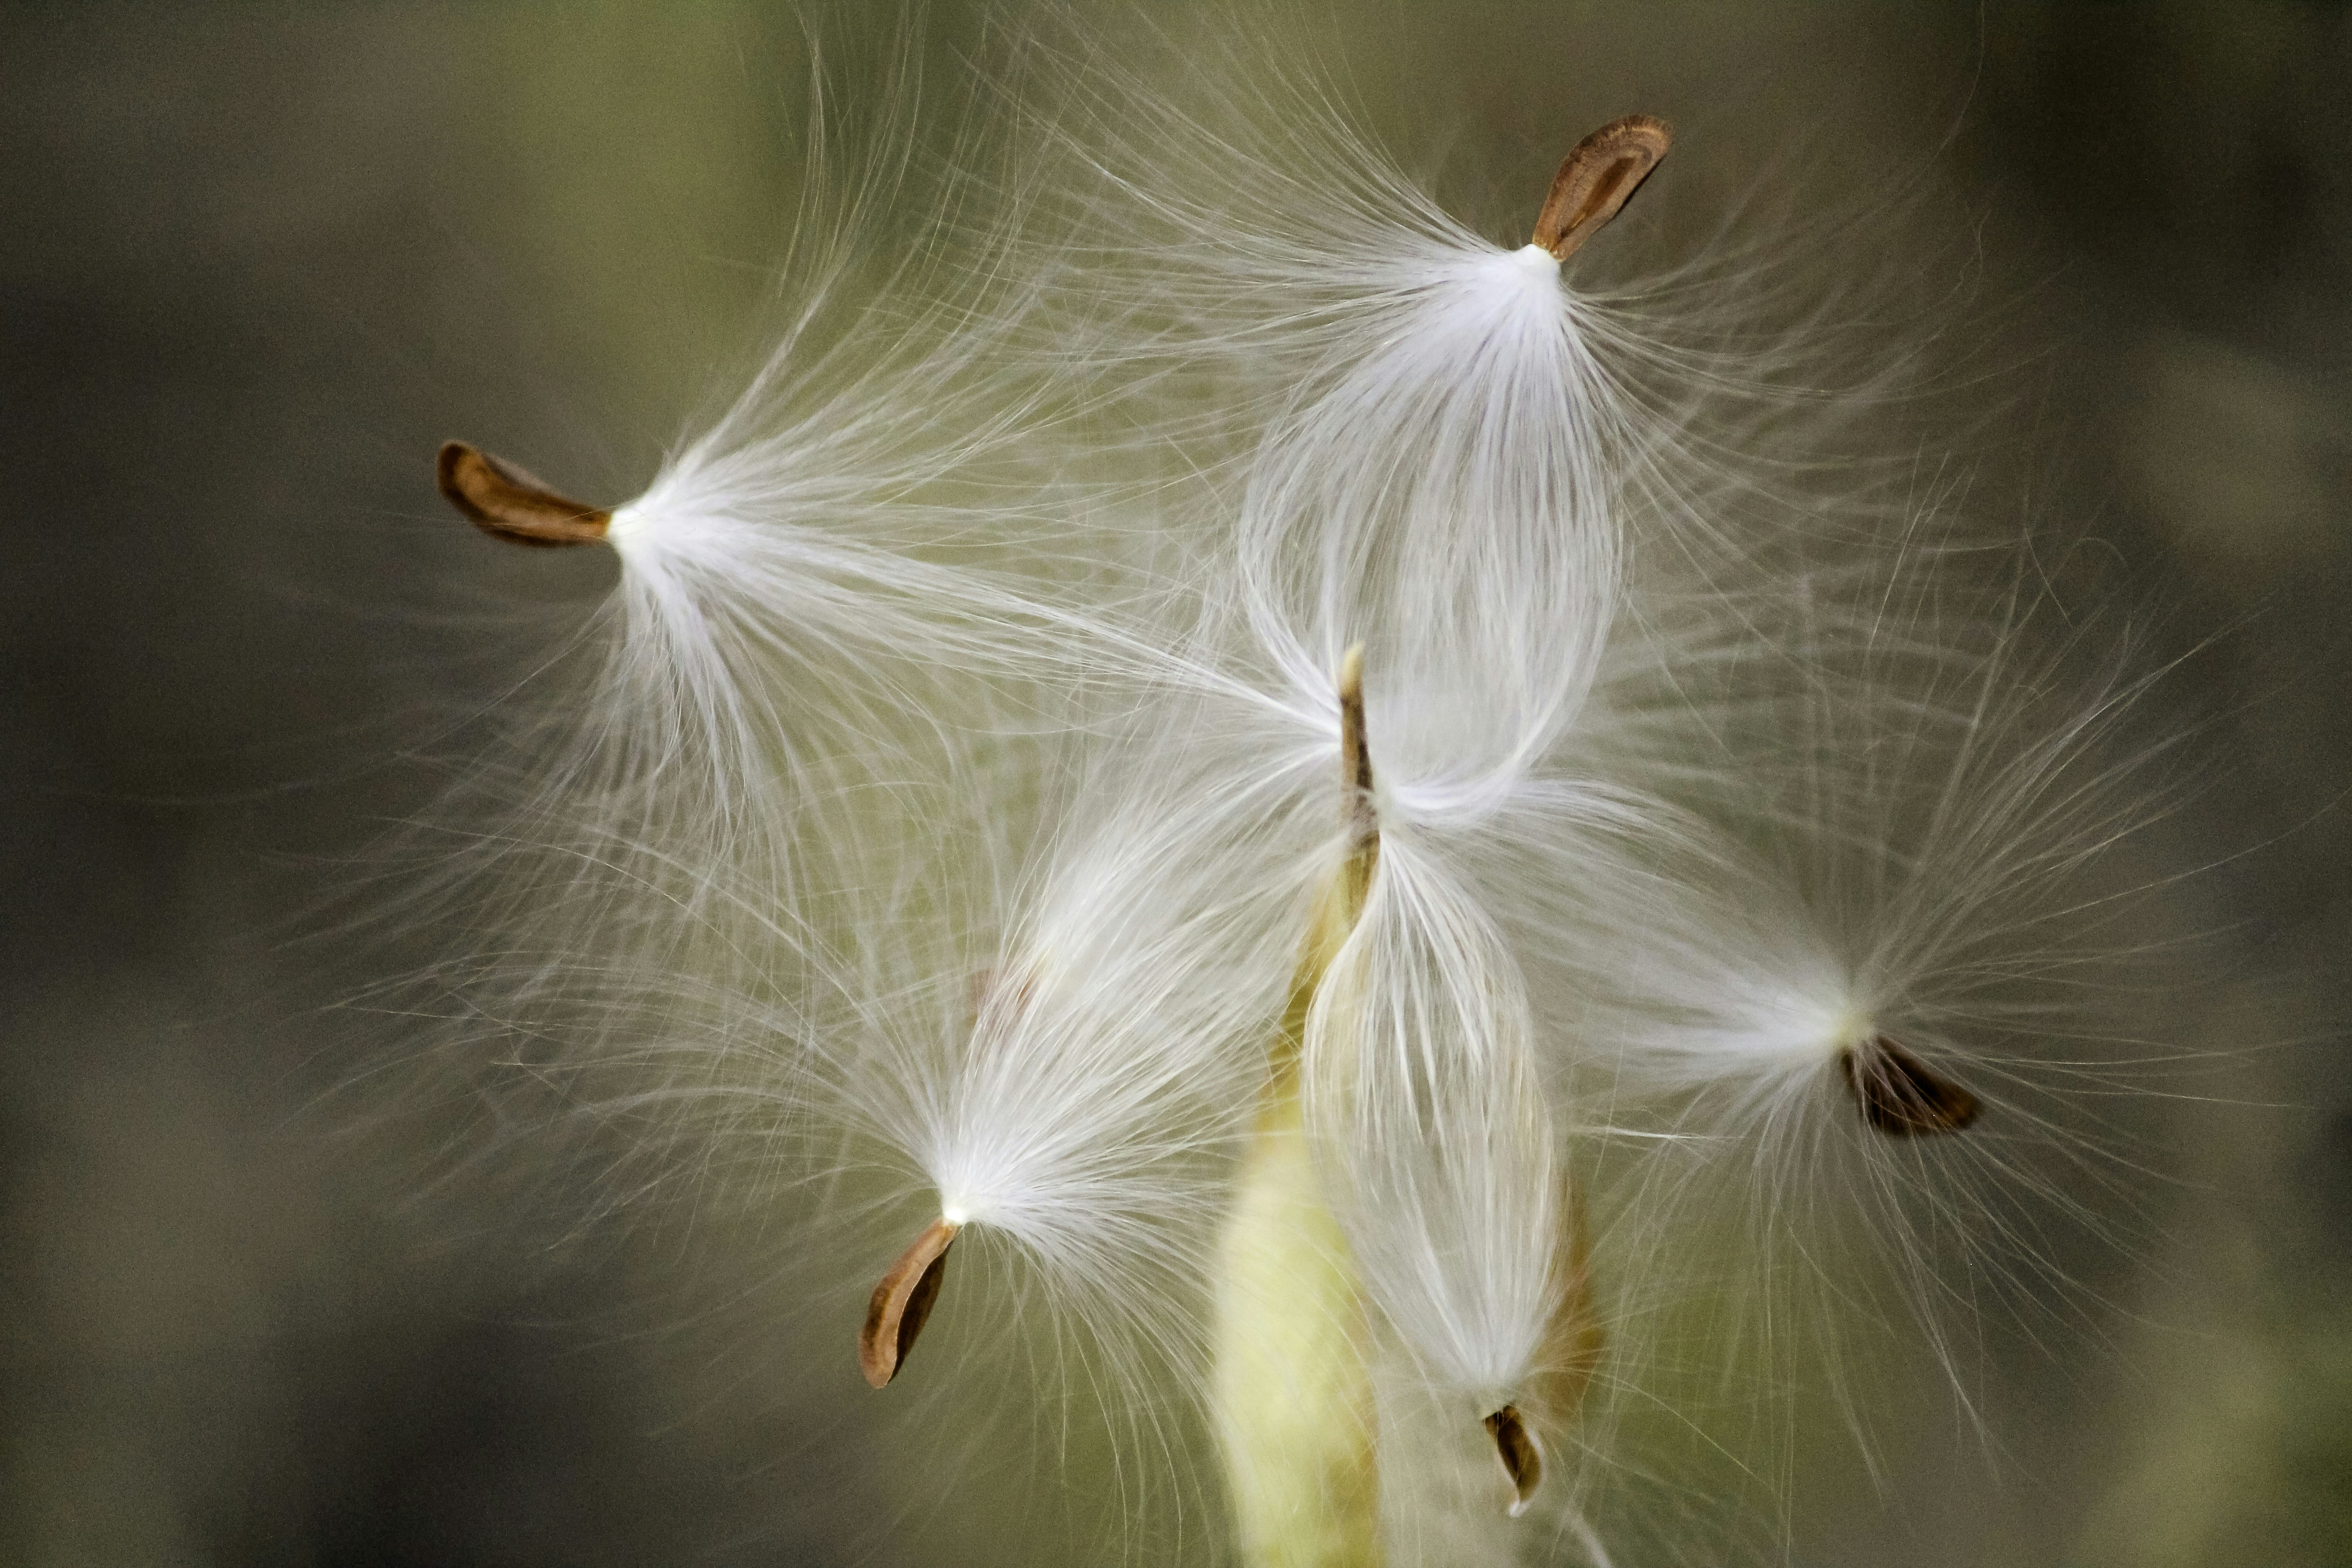 The white hairy seeds of the milkweed fruit - Asclepias syriaca - discovered in on a walk-about in Arizona.